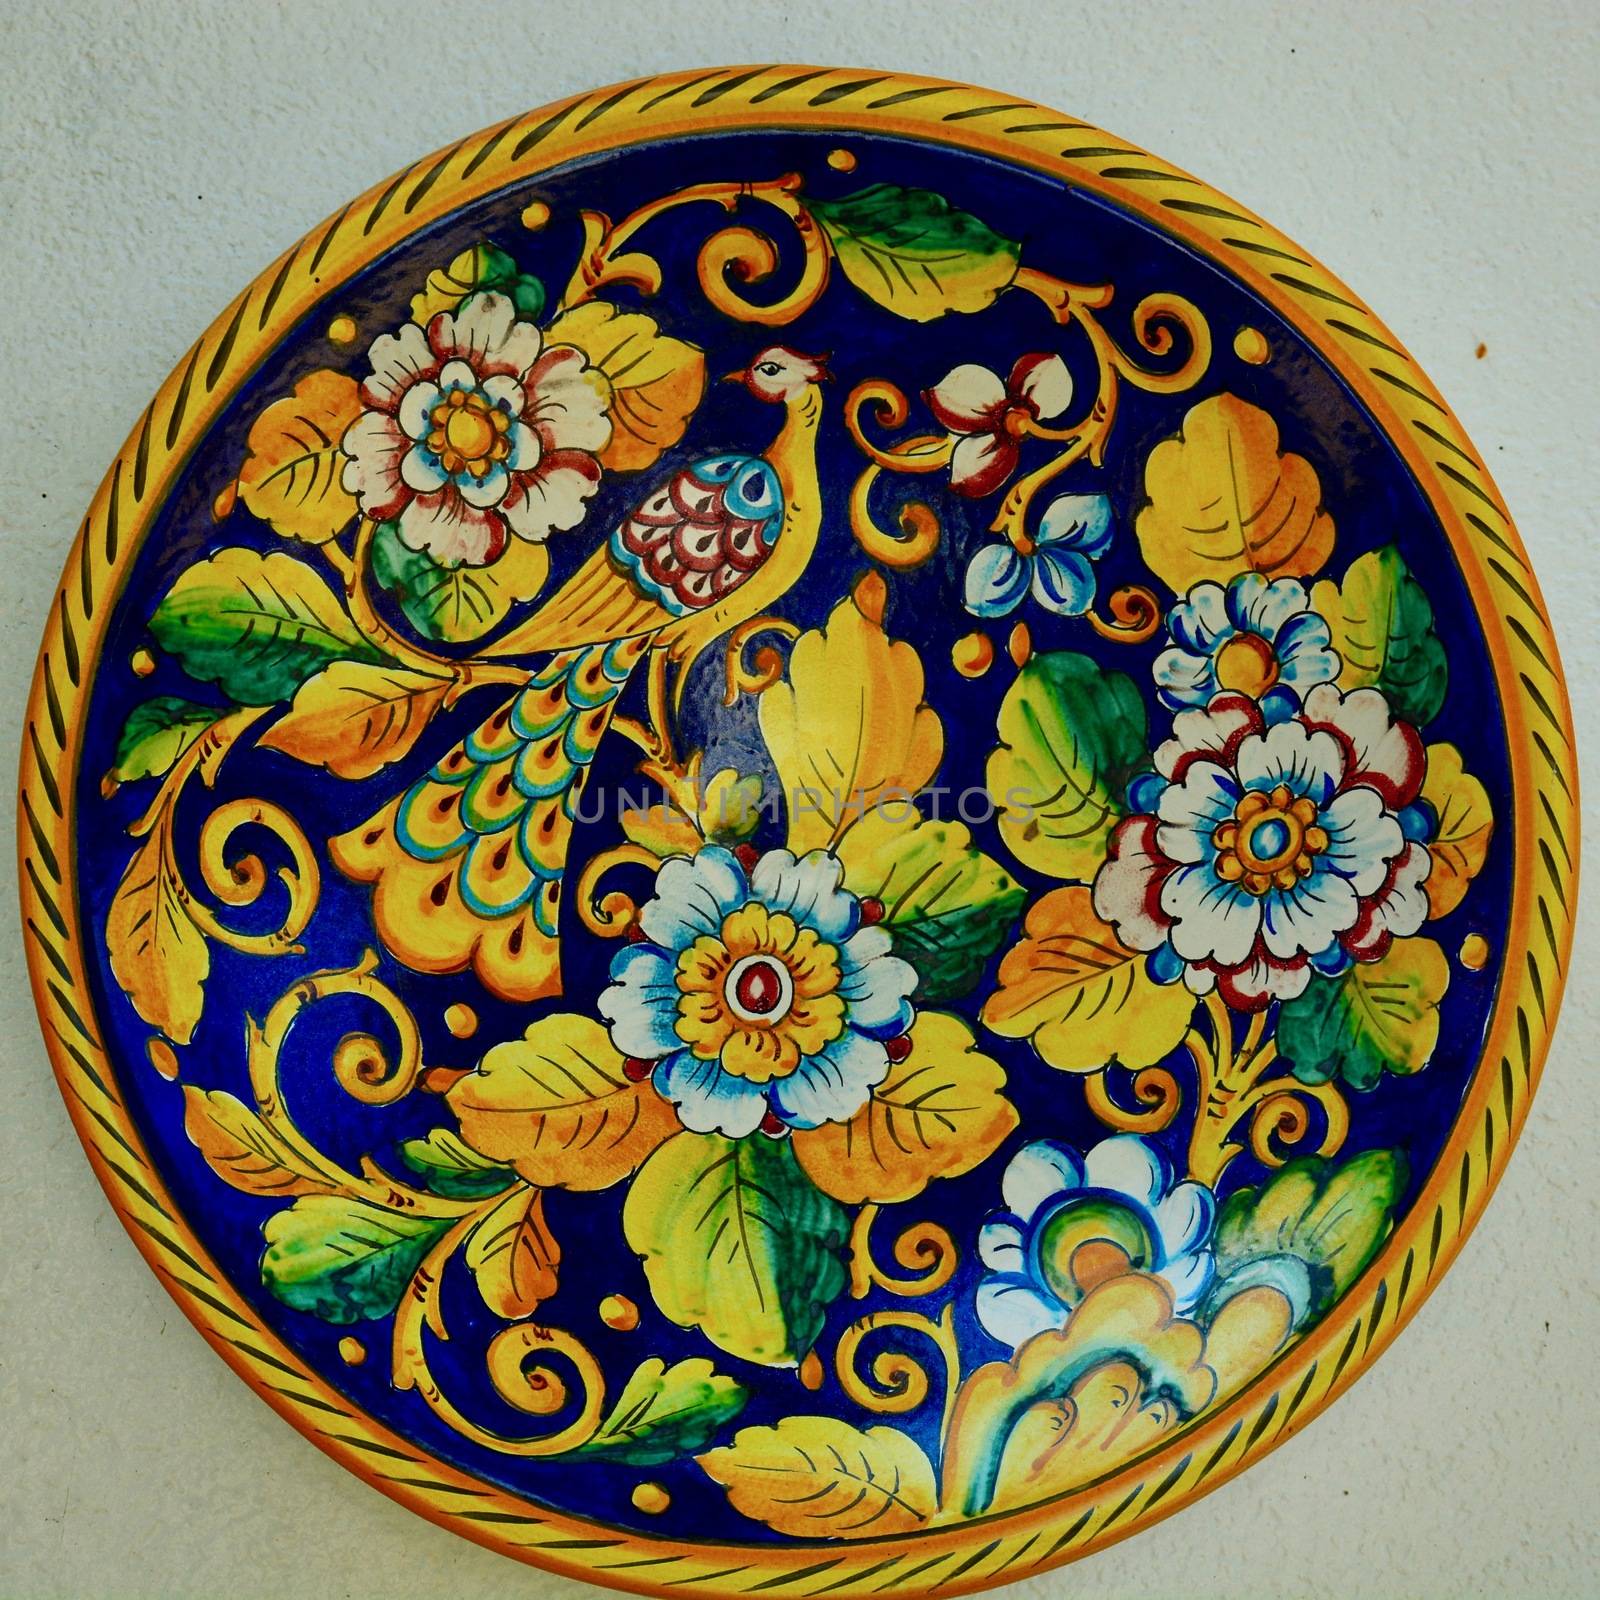 Decorative porcelain plates, cheerful and  brightly coloured, on an outside of a house wall. by Marshalkina